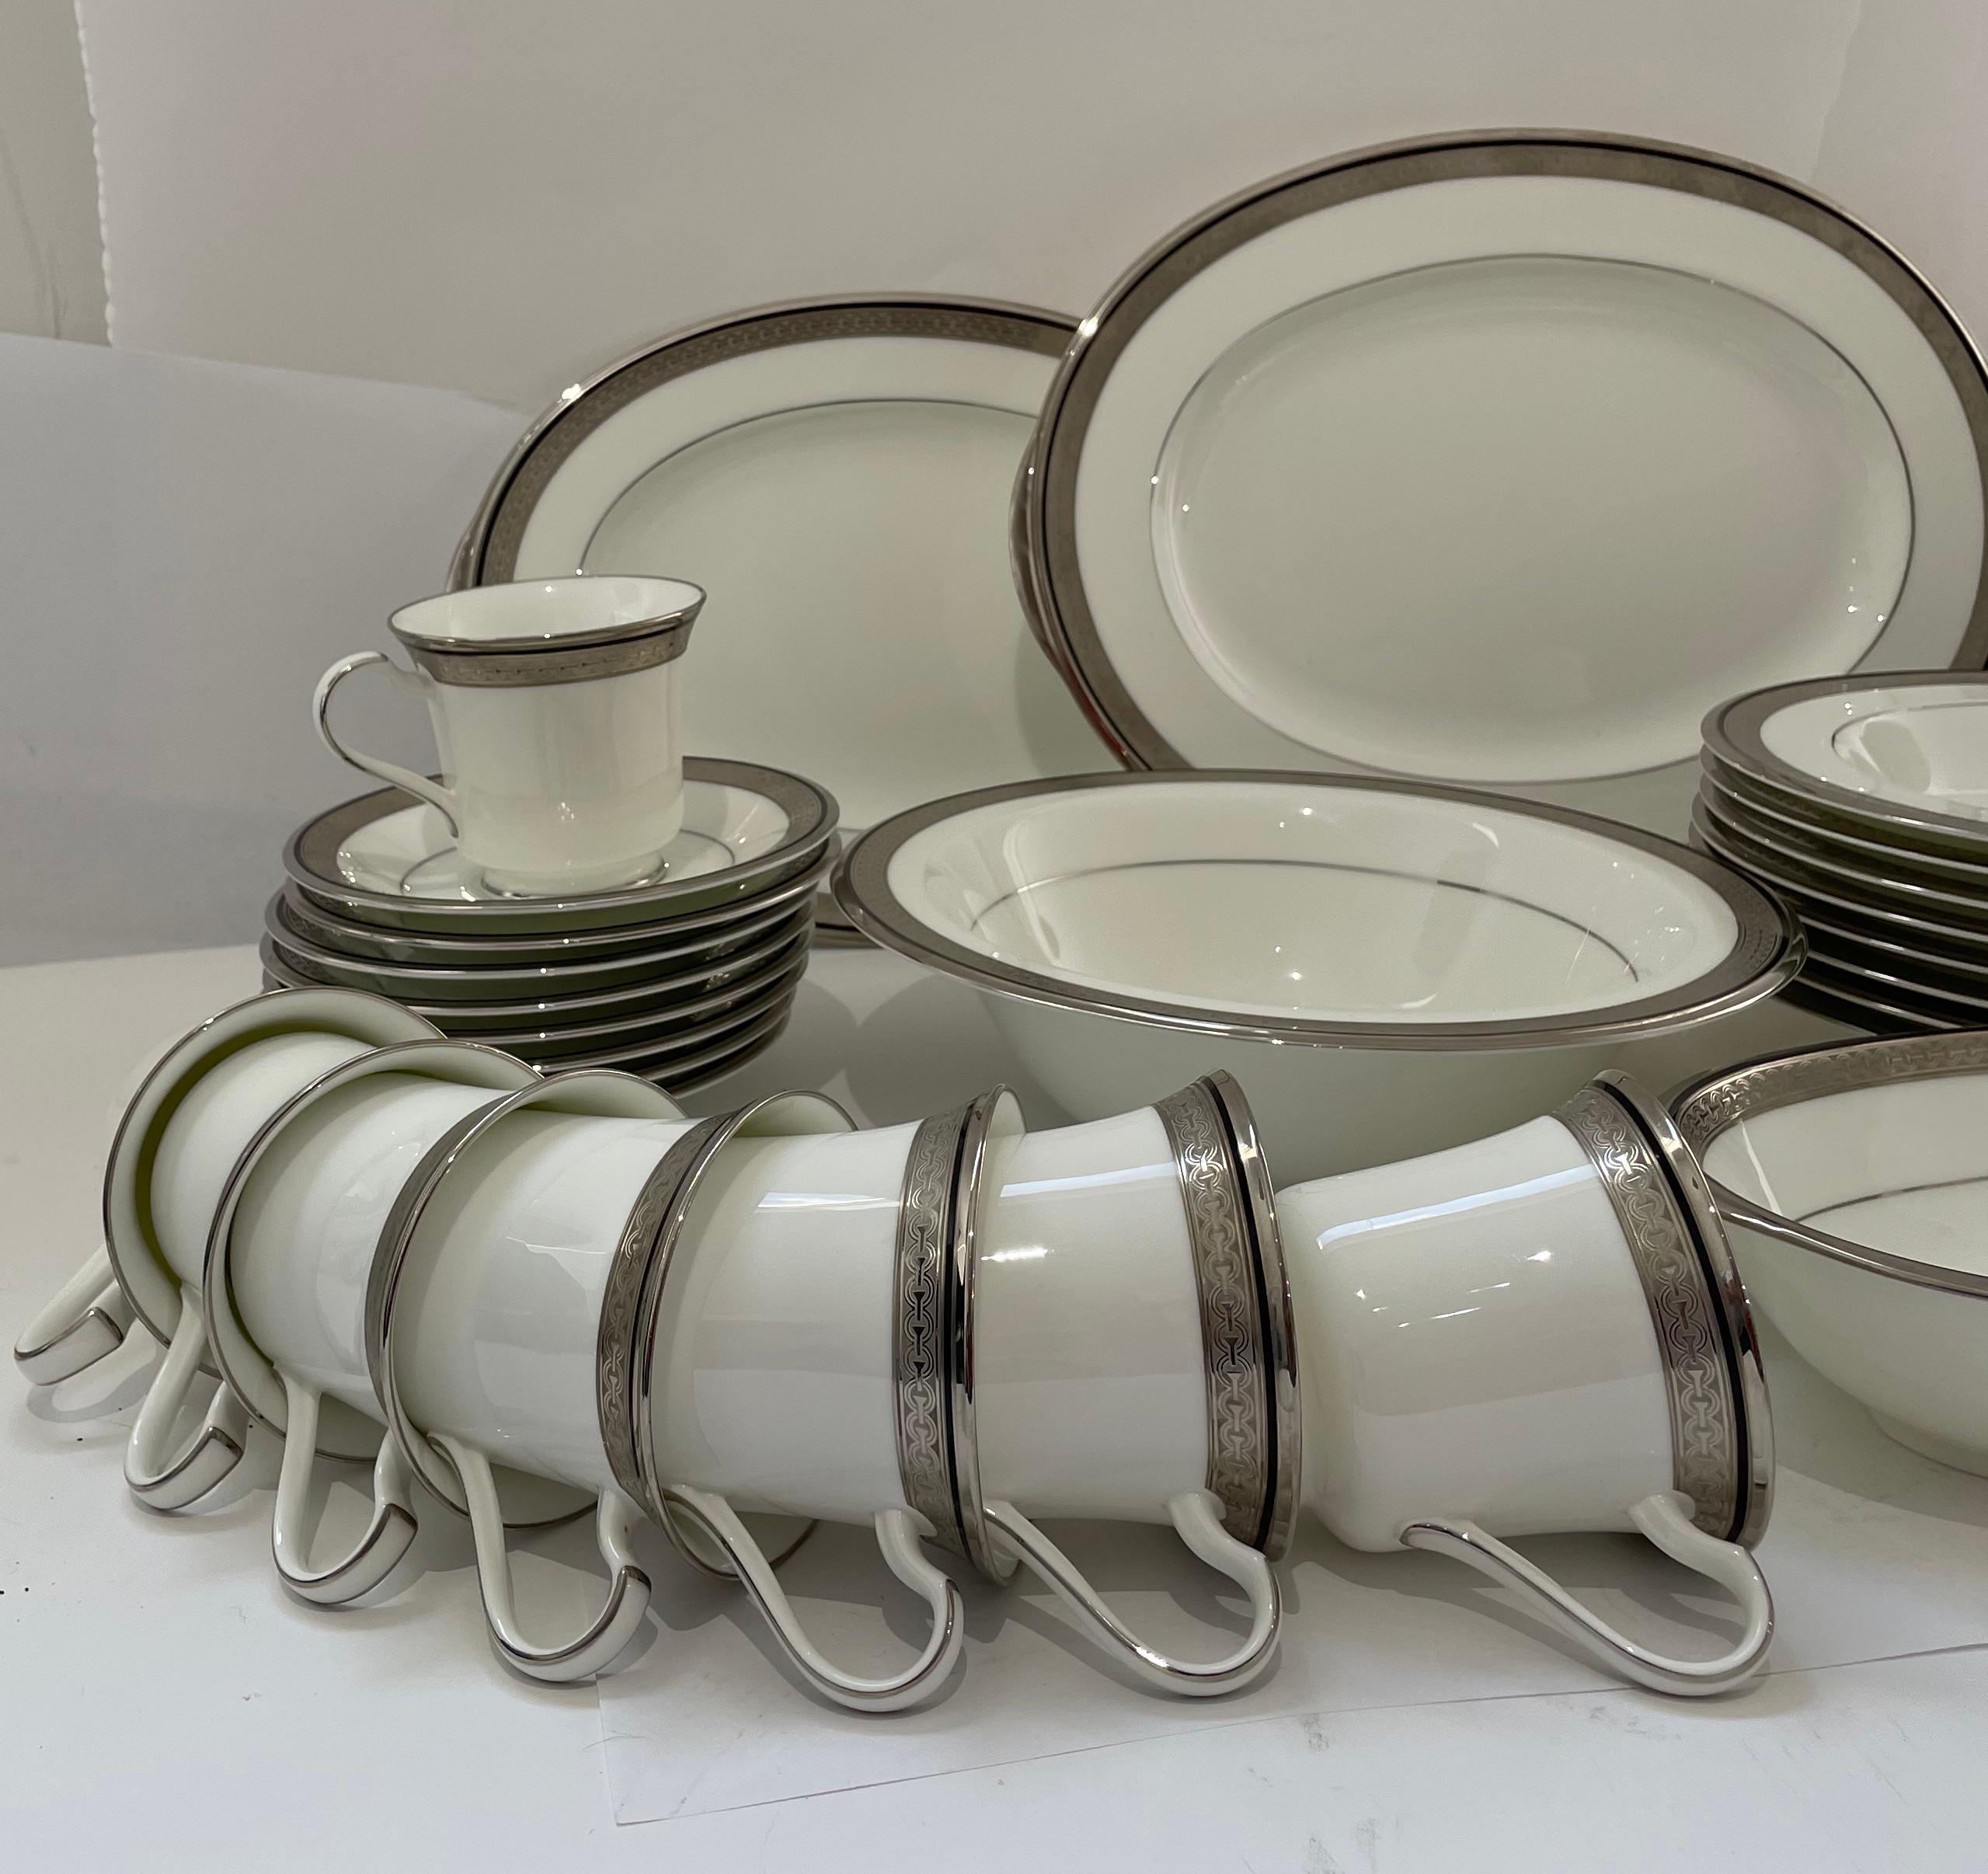 Noritake Chatelaine Platinum Dinner Service for Eight In Good Condition For Sale In West Palm Beach, FL